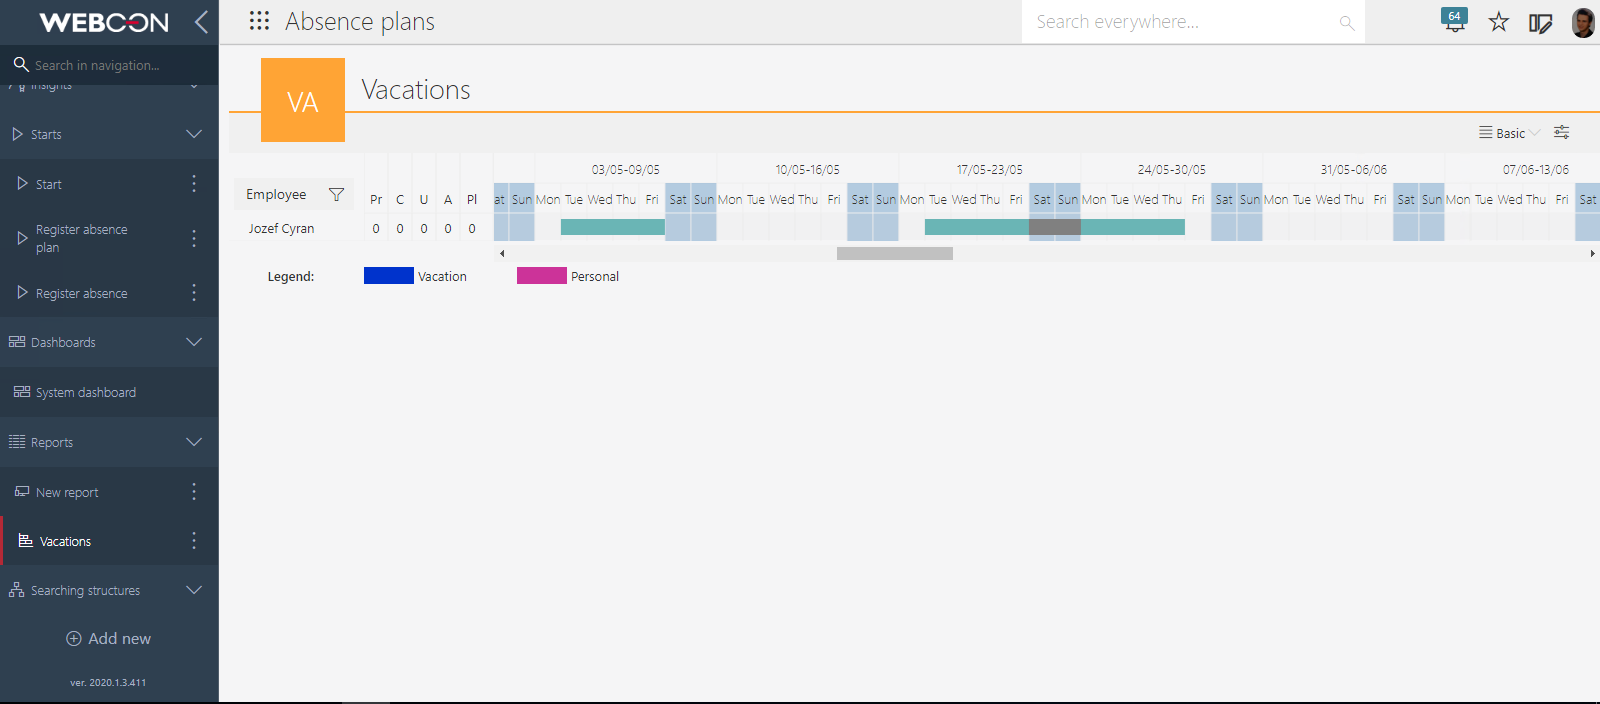 The image shows the presentation of the registered absence plans on the Gantt chart